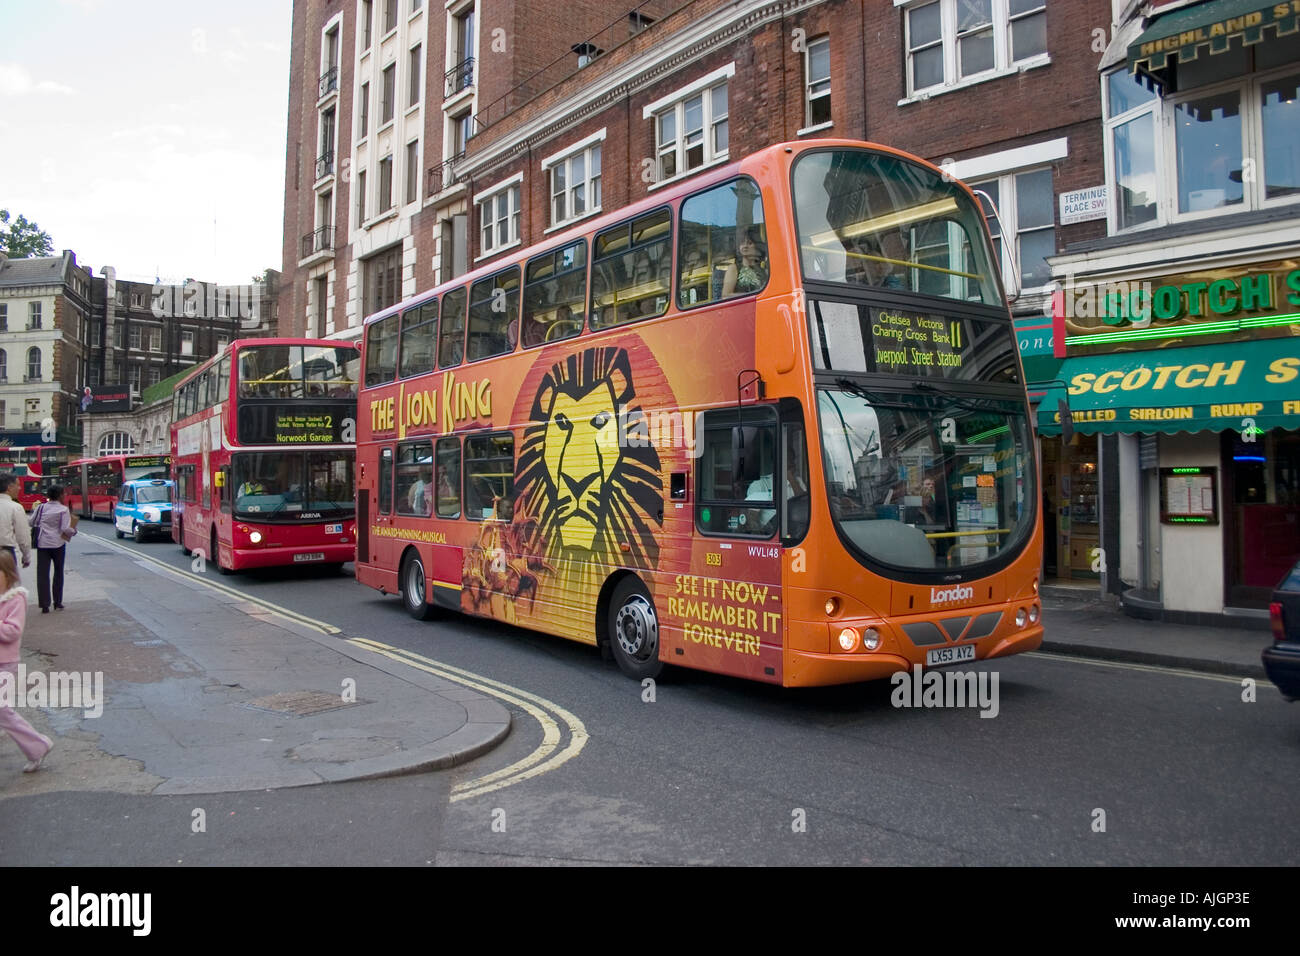 WVL148 in The Lion King Livery at Victoria Bus Station Stock Photo